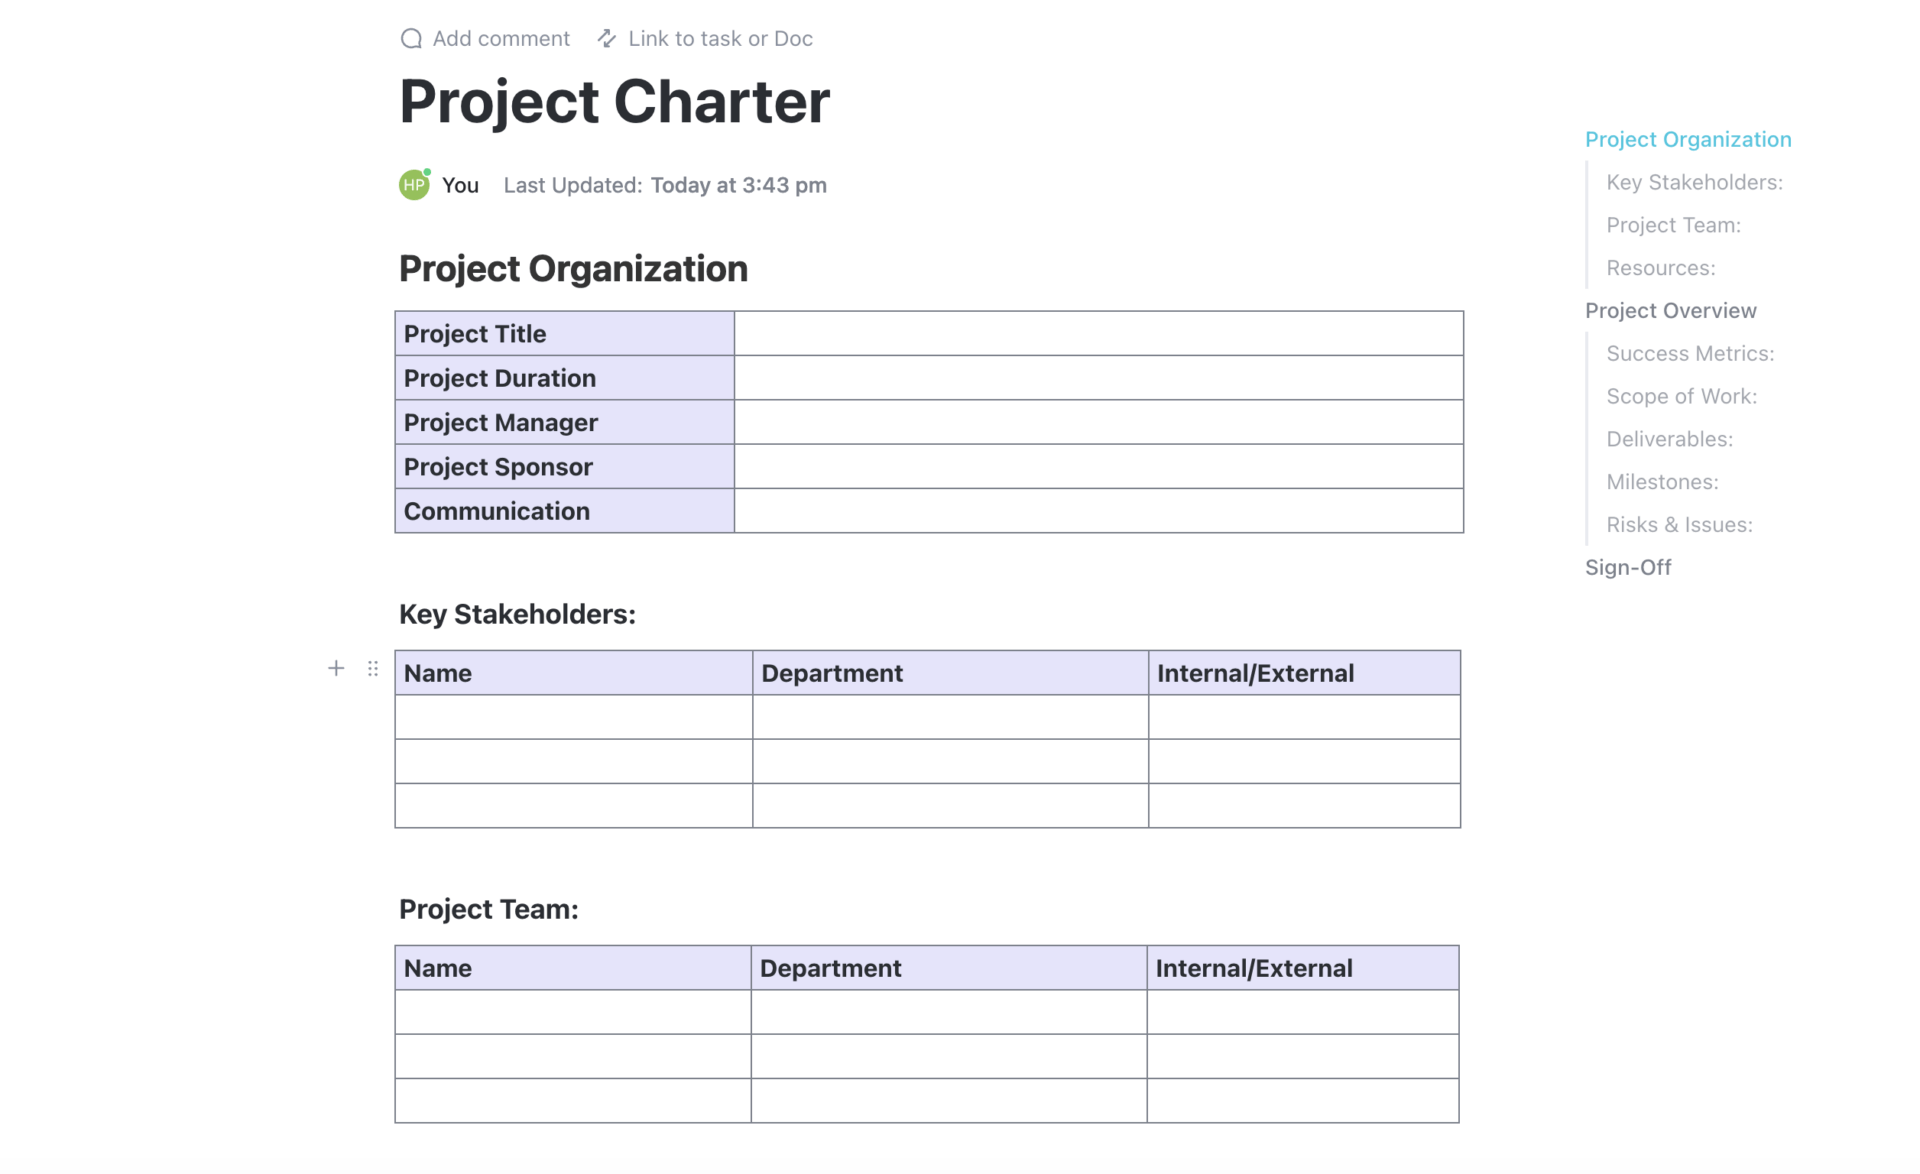 ClickUp's Project Charter Template will provide you with everything you need to plan and deliver successful projects